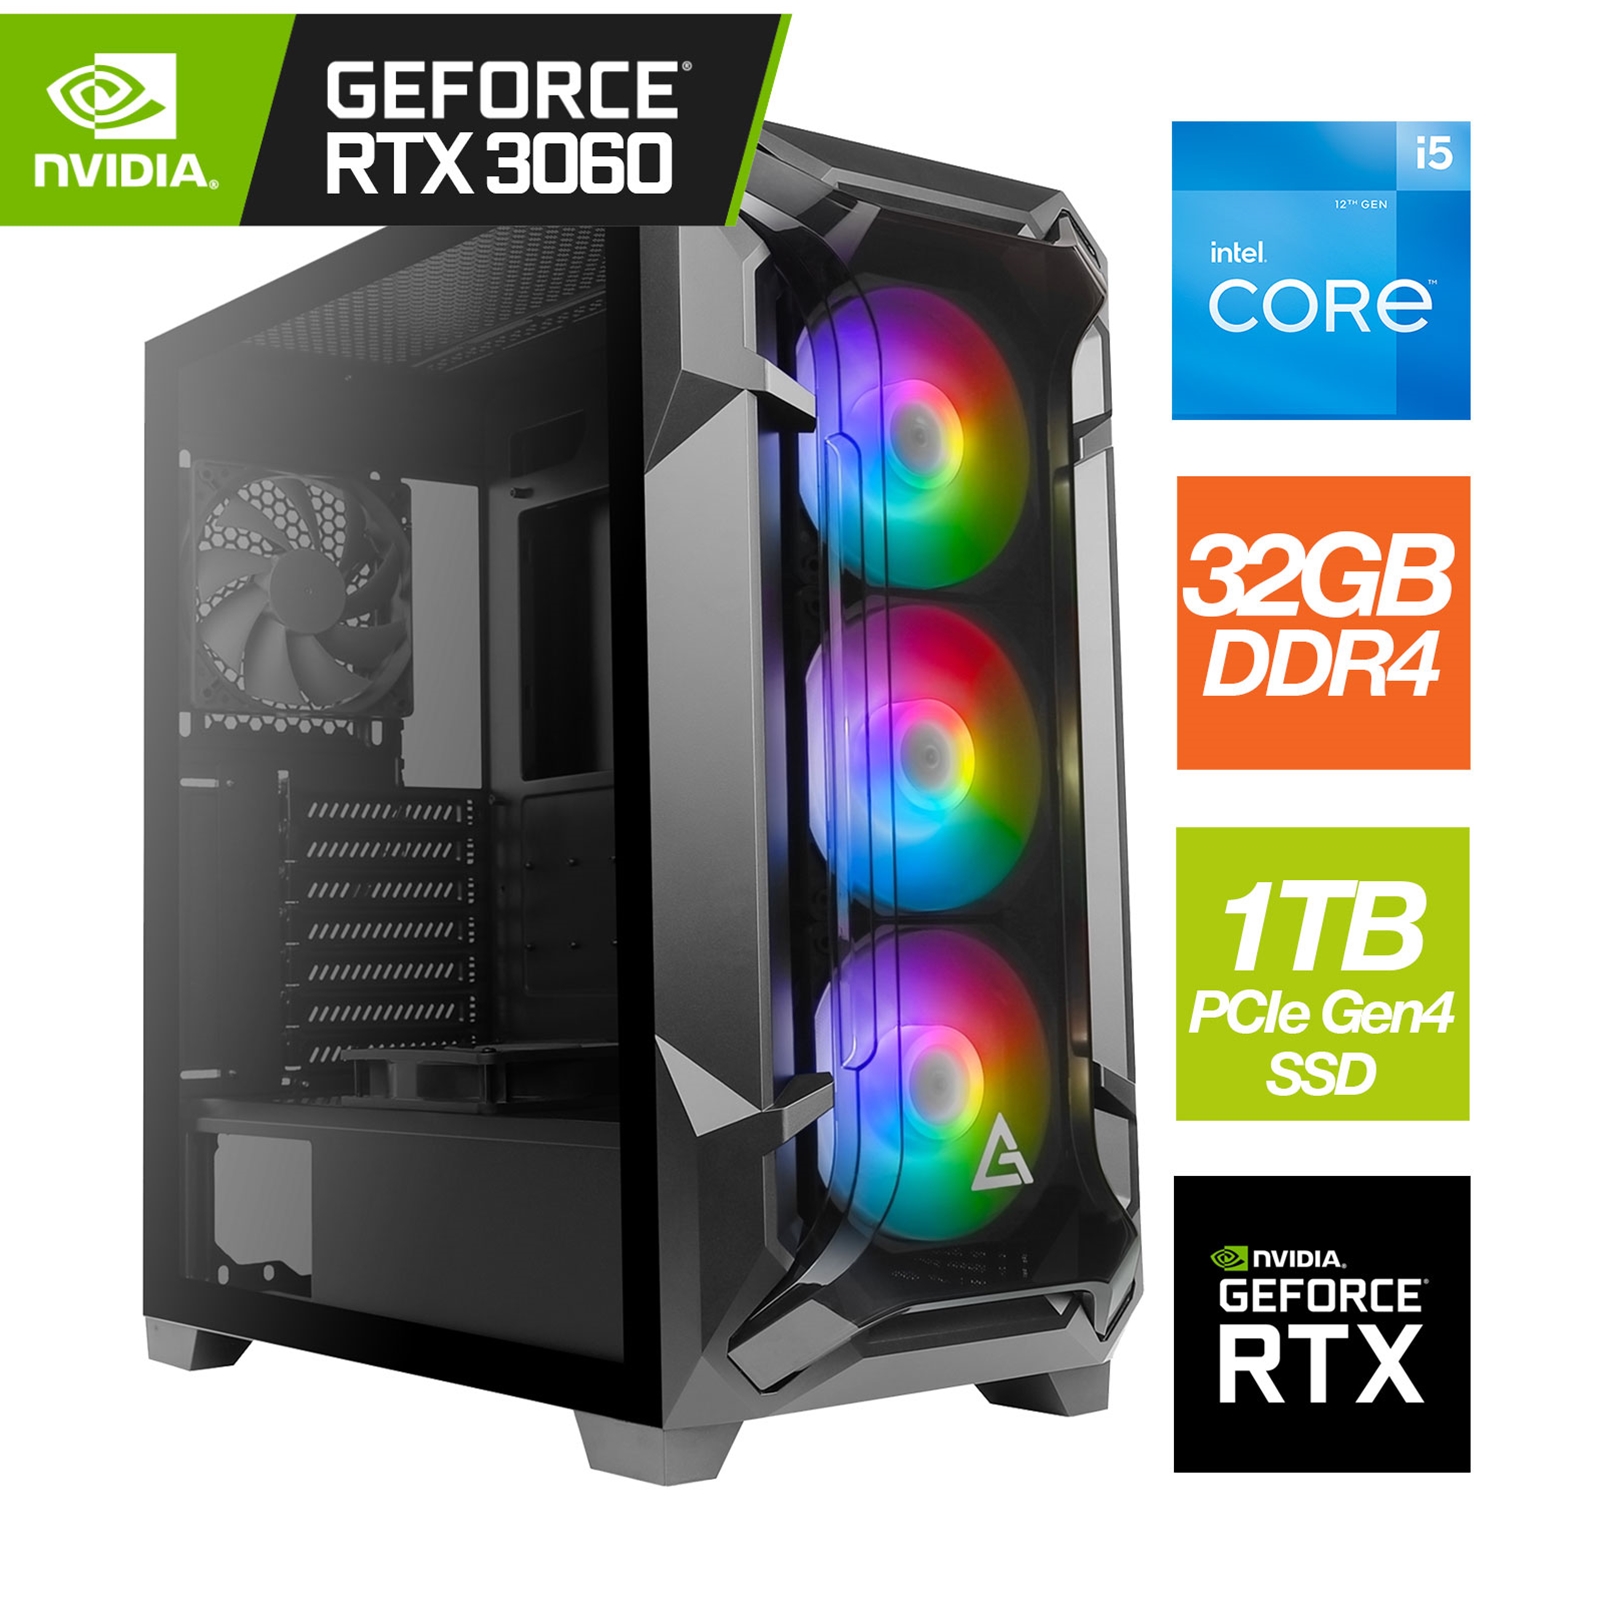 Antec RGB Gaming Case with Intel's latest 12th Gen i5 12600K Overclockable Processor with 10 Cores and 20 Threads 3.70GHz (4.90GHz Boost), 32GB of fast memory,  1TB Gen4 NVMe, with an RTX3060 Graphics card - Prebuilt System